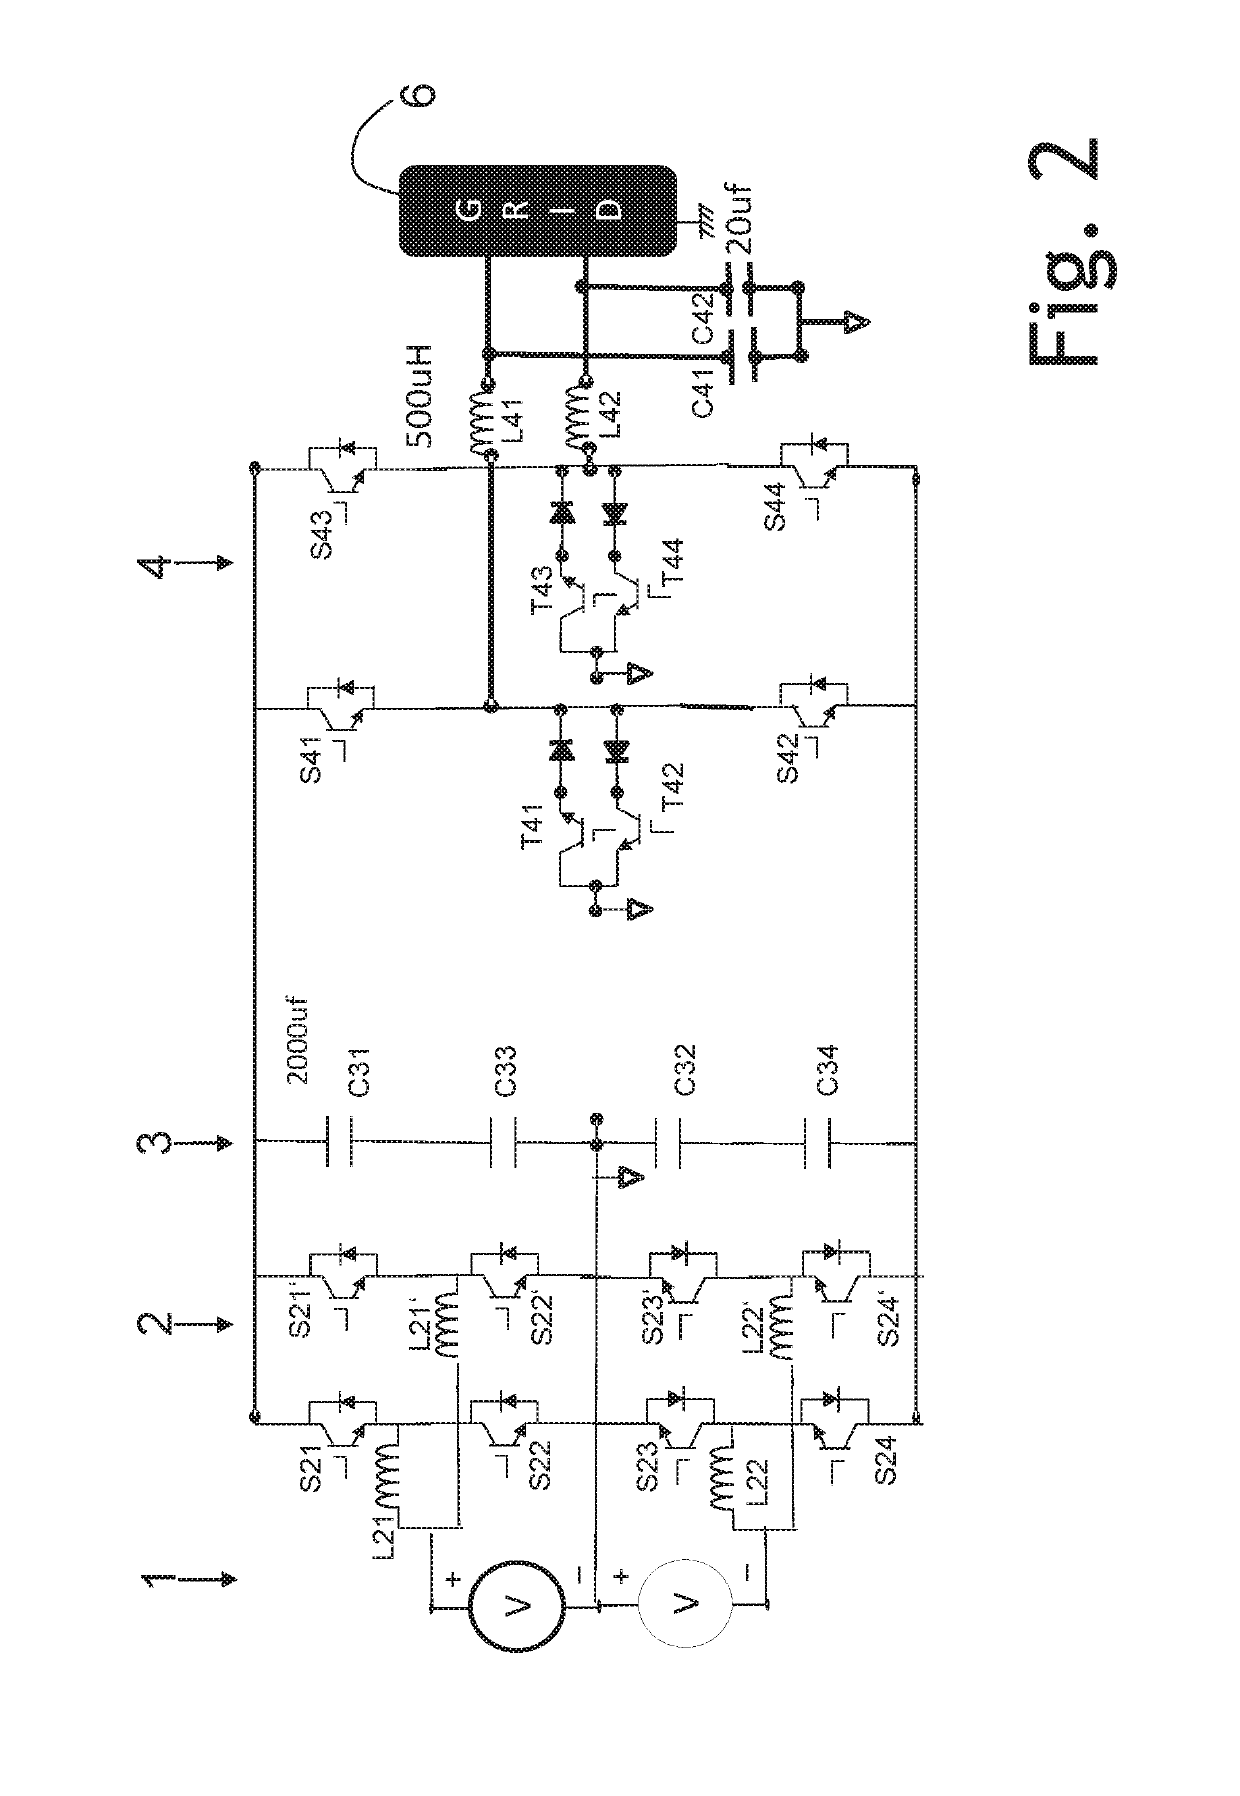 Inverter device, energy storage system and method of controlling an inverter device